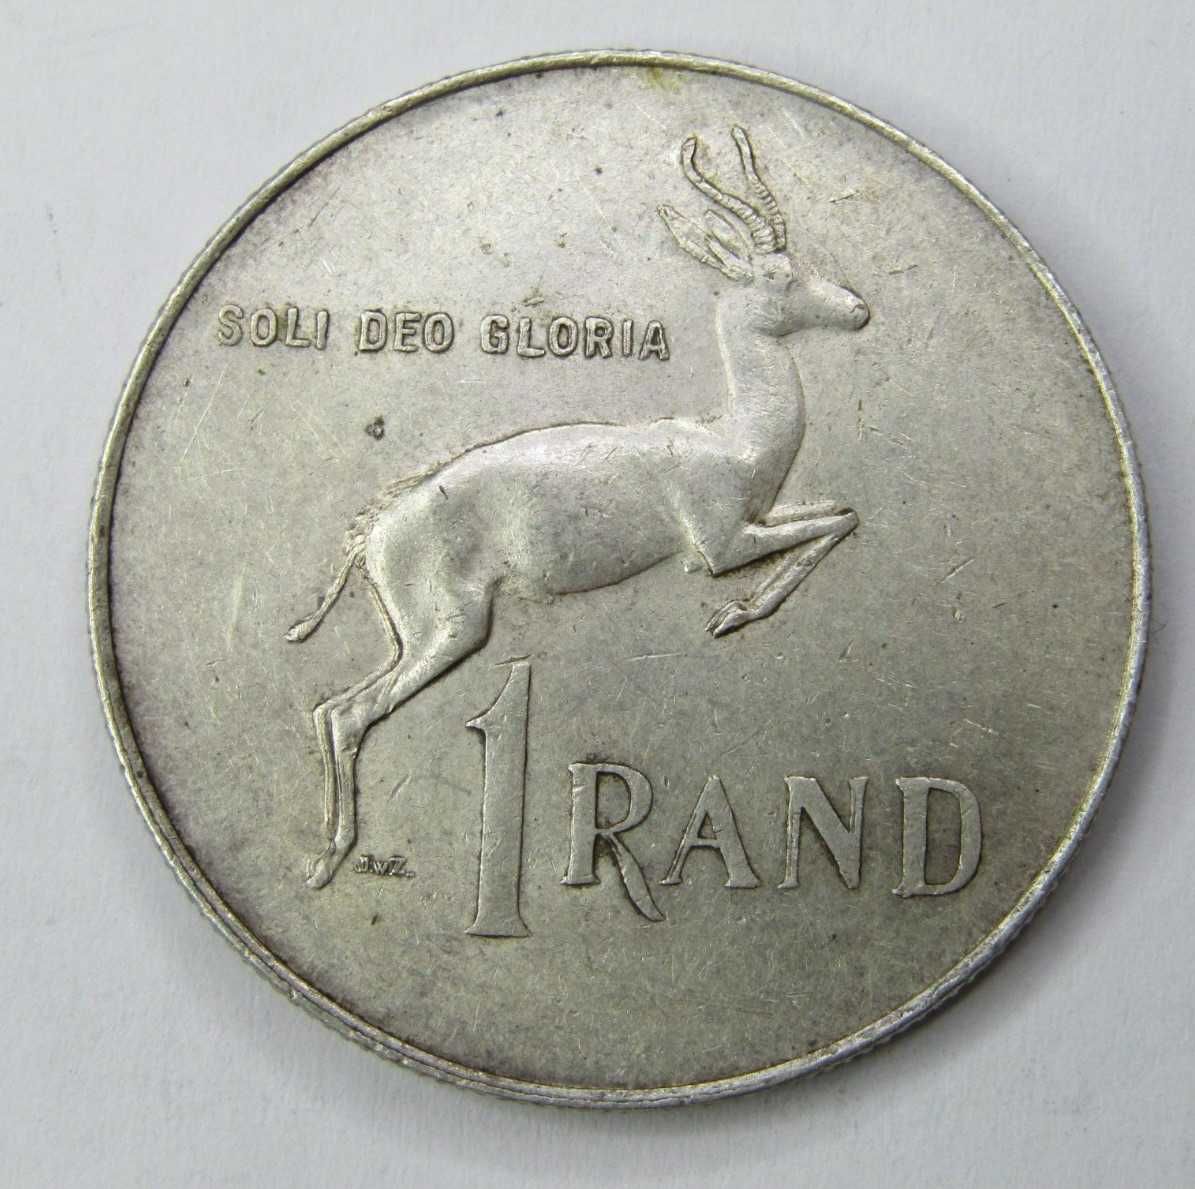 1967 South African Silver One Rand coin (with double strike error)